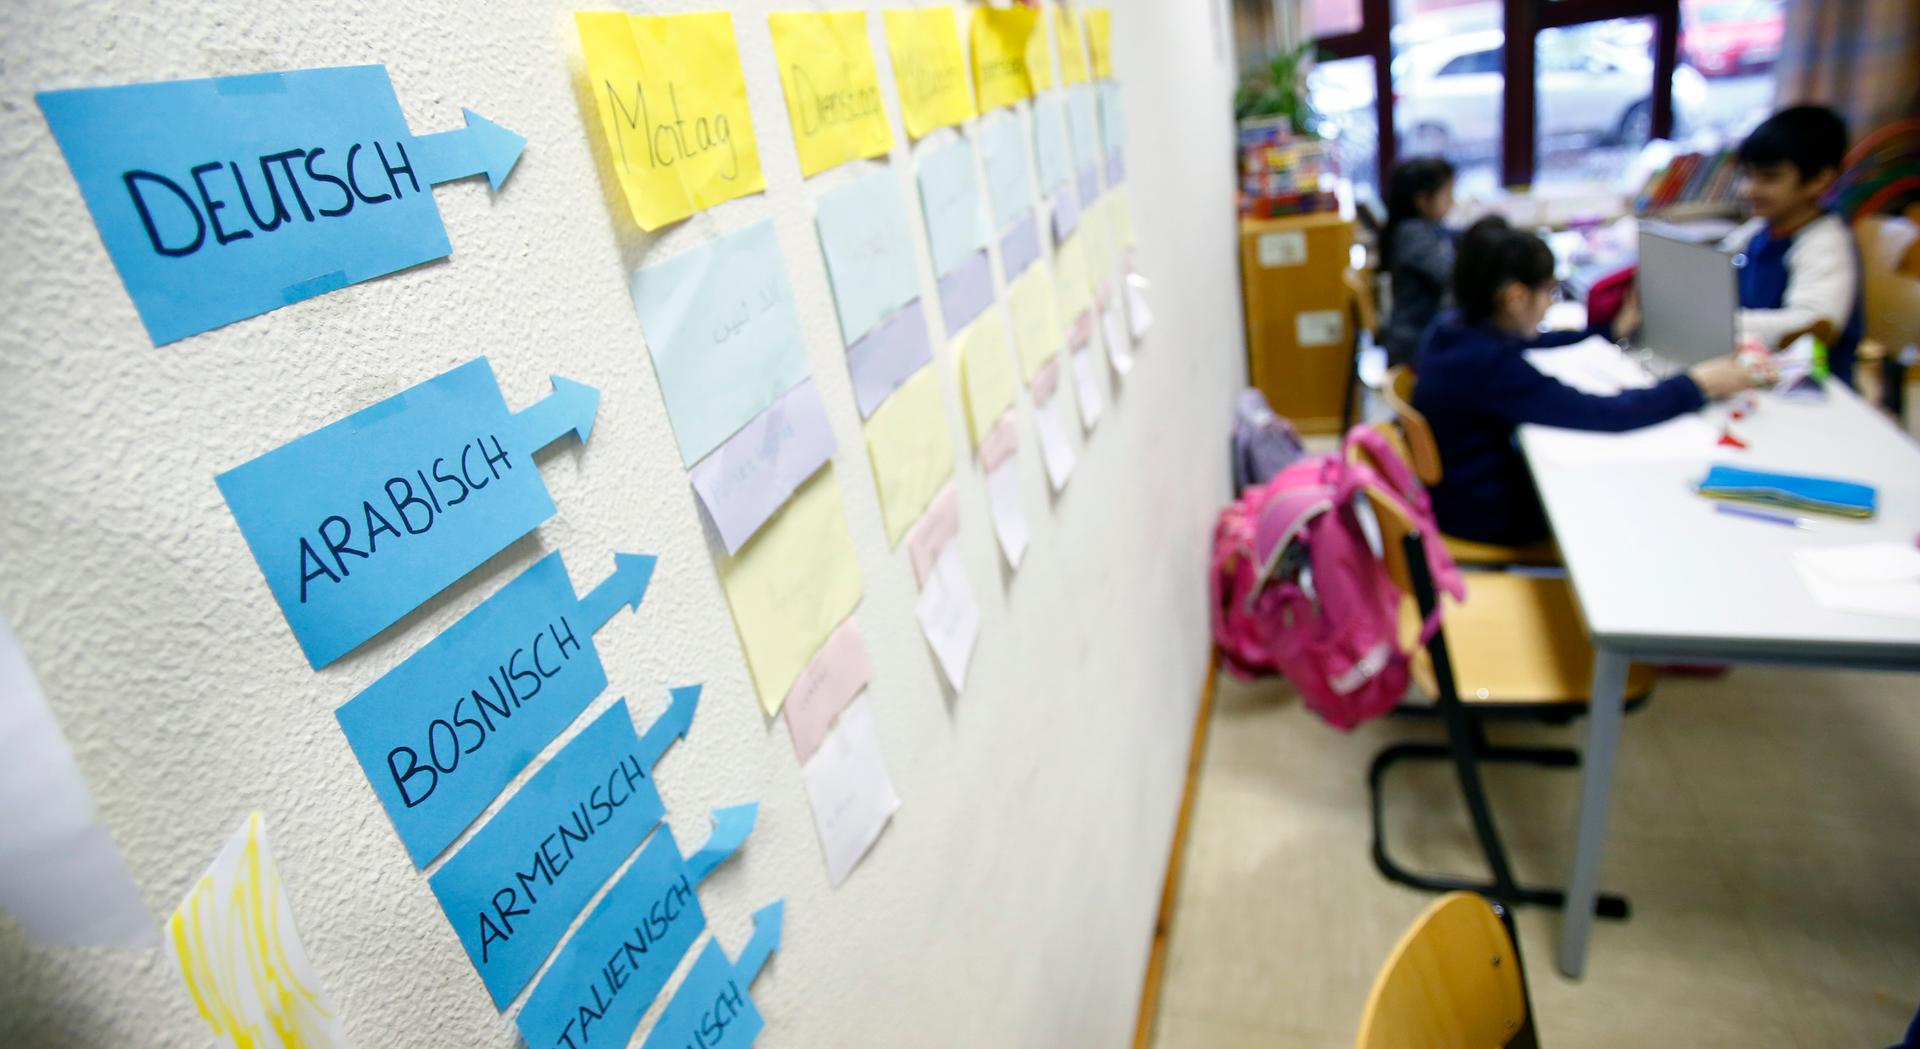 Berlin now has about 1,100 welcome classes in its more than 600 schools. Here, notes on a wall help students from different countries learn German at the Sankt Franziskus school, Jan. 22, 2016.